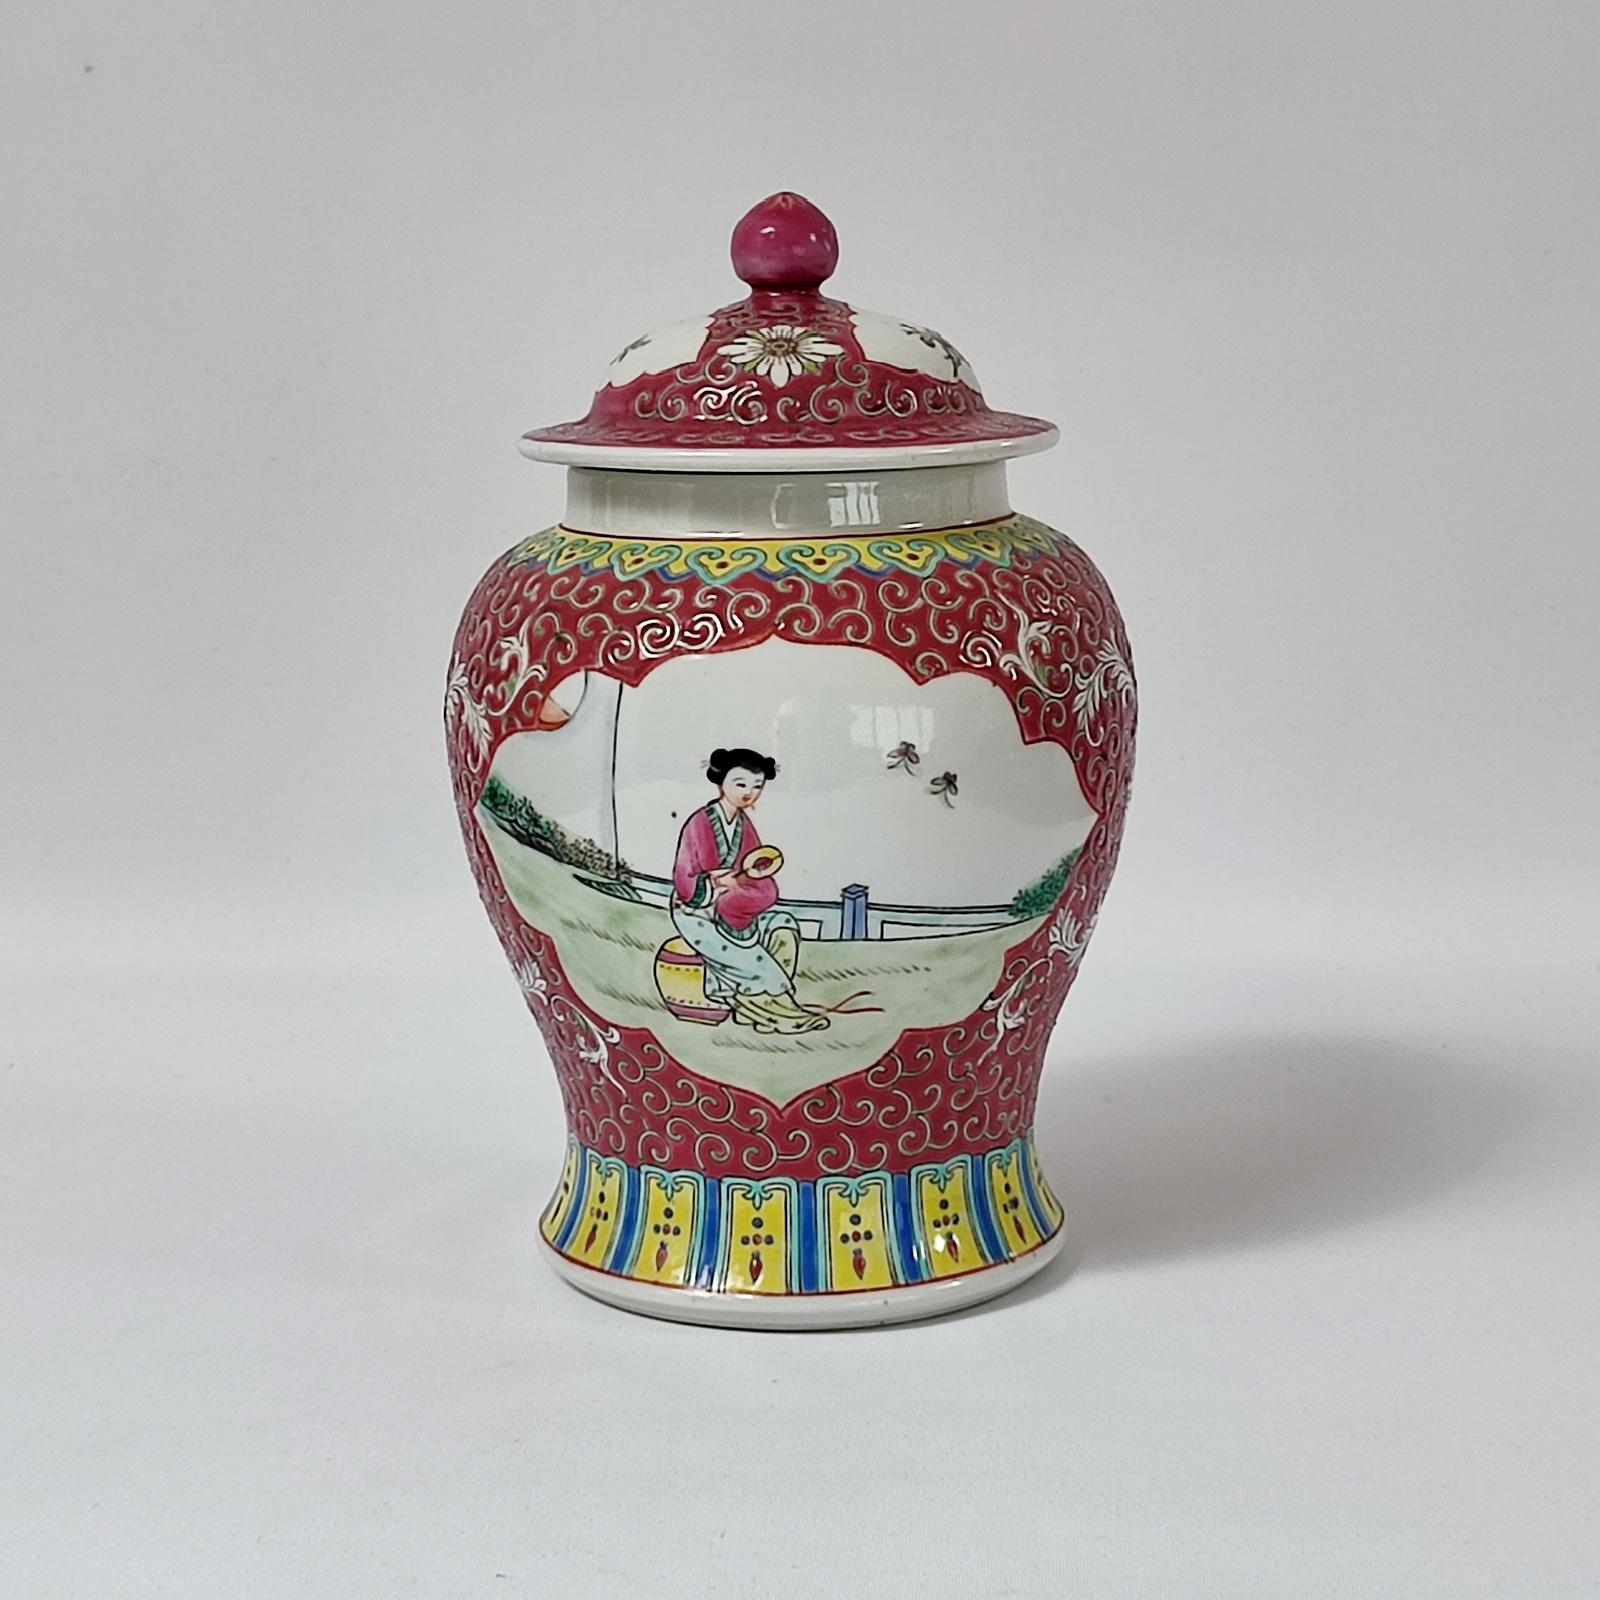 Mid-century early People Chinese Republic period hand enameled porcelain lidded urn vase, Jiangxi Jingdezhen Min Ci 6 Hao Cai mark under the bottom, Famille-rose

Dimensions: height 21 cm, diameter 13 cm.